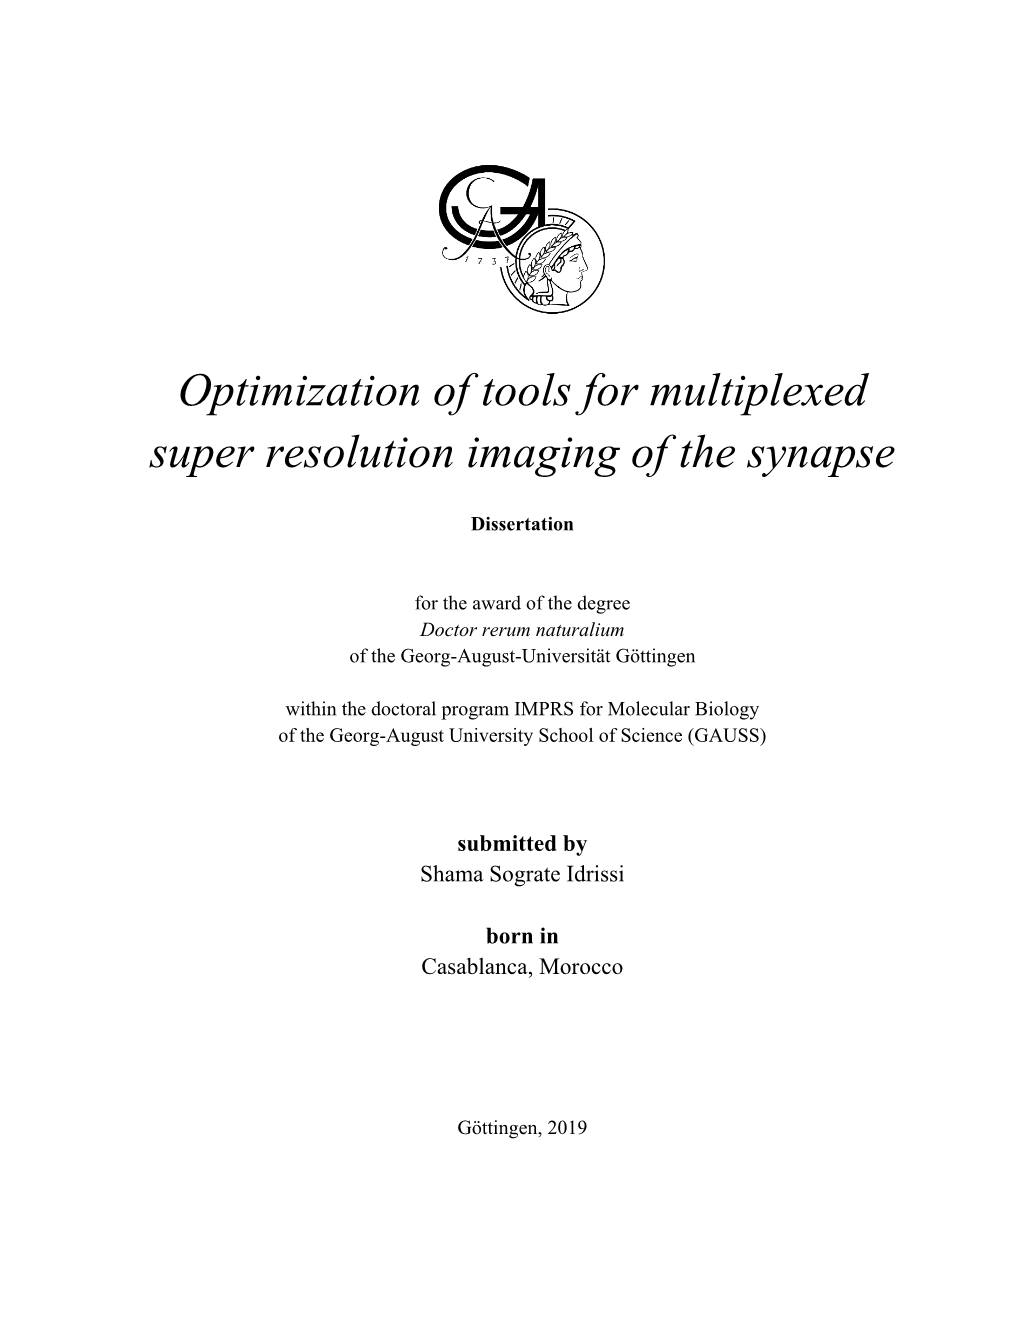 Optimization of Tools for Multiplexed Super Resolution Imaging of the Synapse